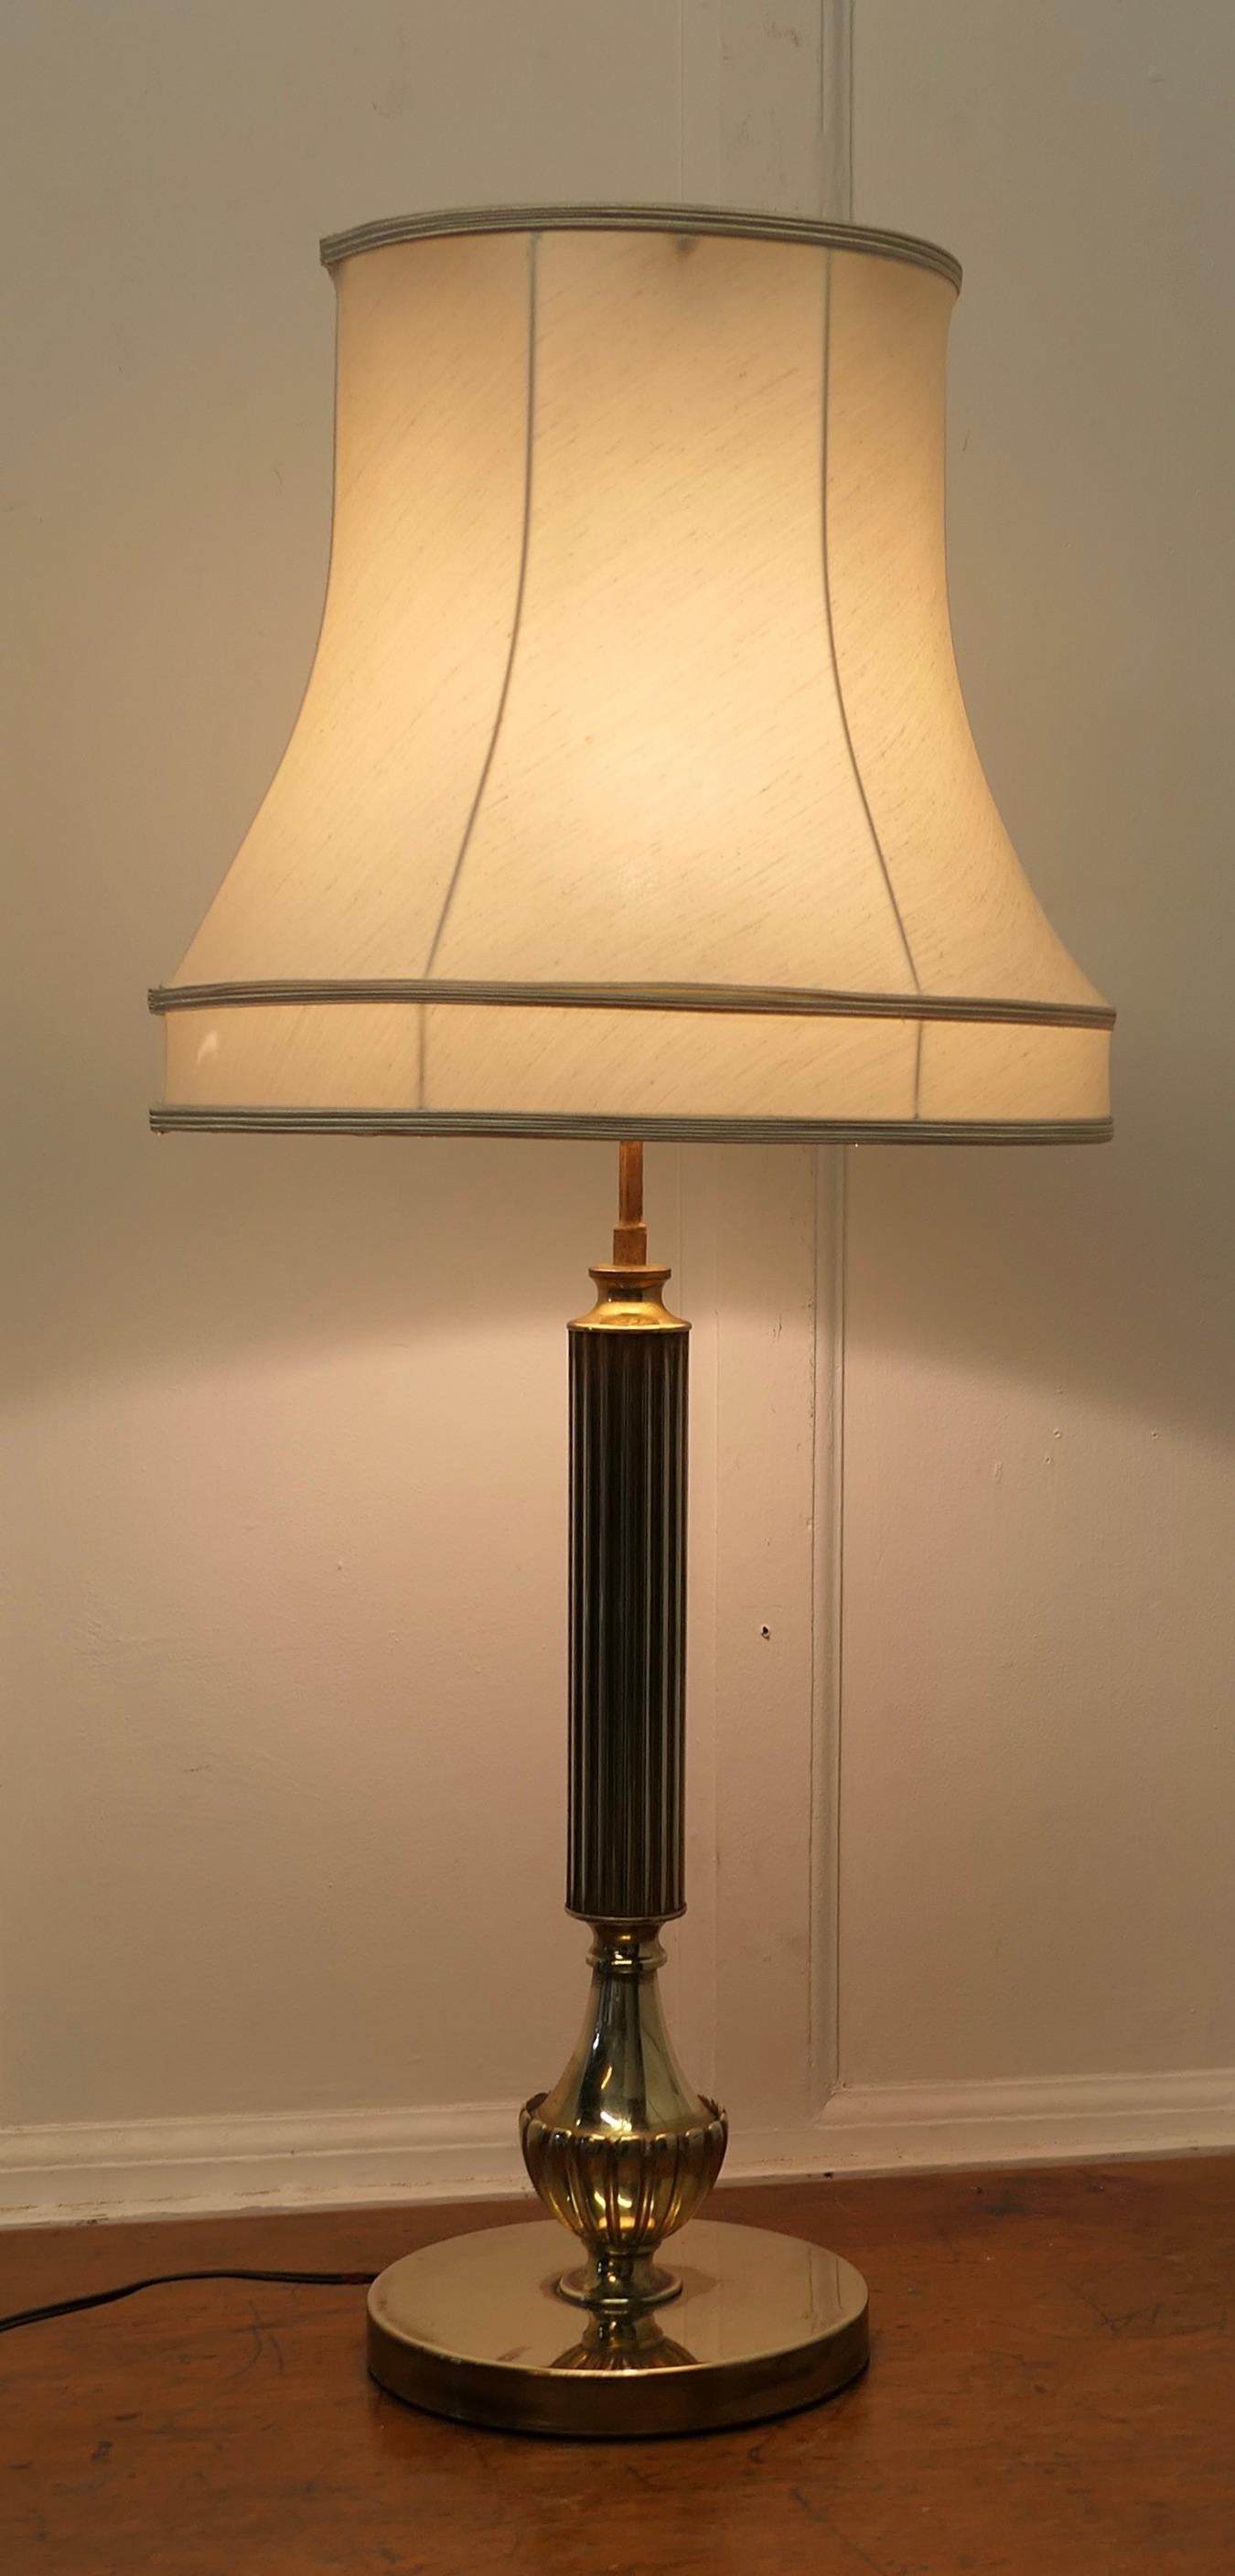 Central Brass Column Table Lamp

This is an attractive lamp it has a single fluted column and is set on a round  brass base
The lamp is in good condition, working and with a bright patina, the shade can be included if requested.
The lamp is 23” tall